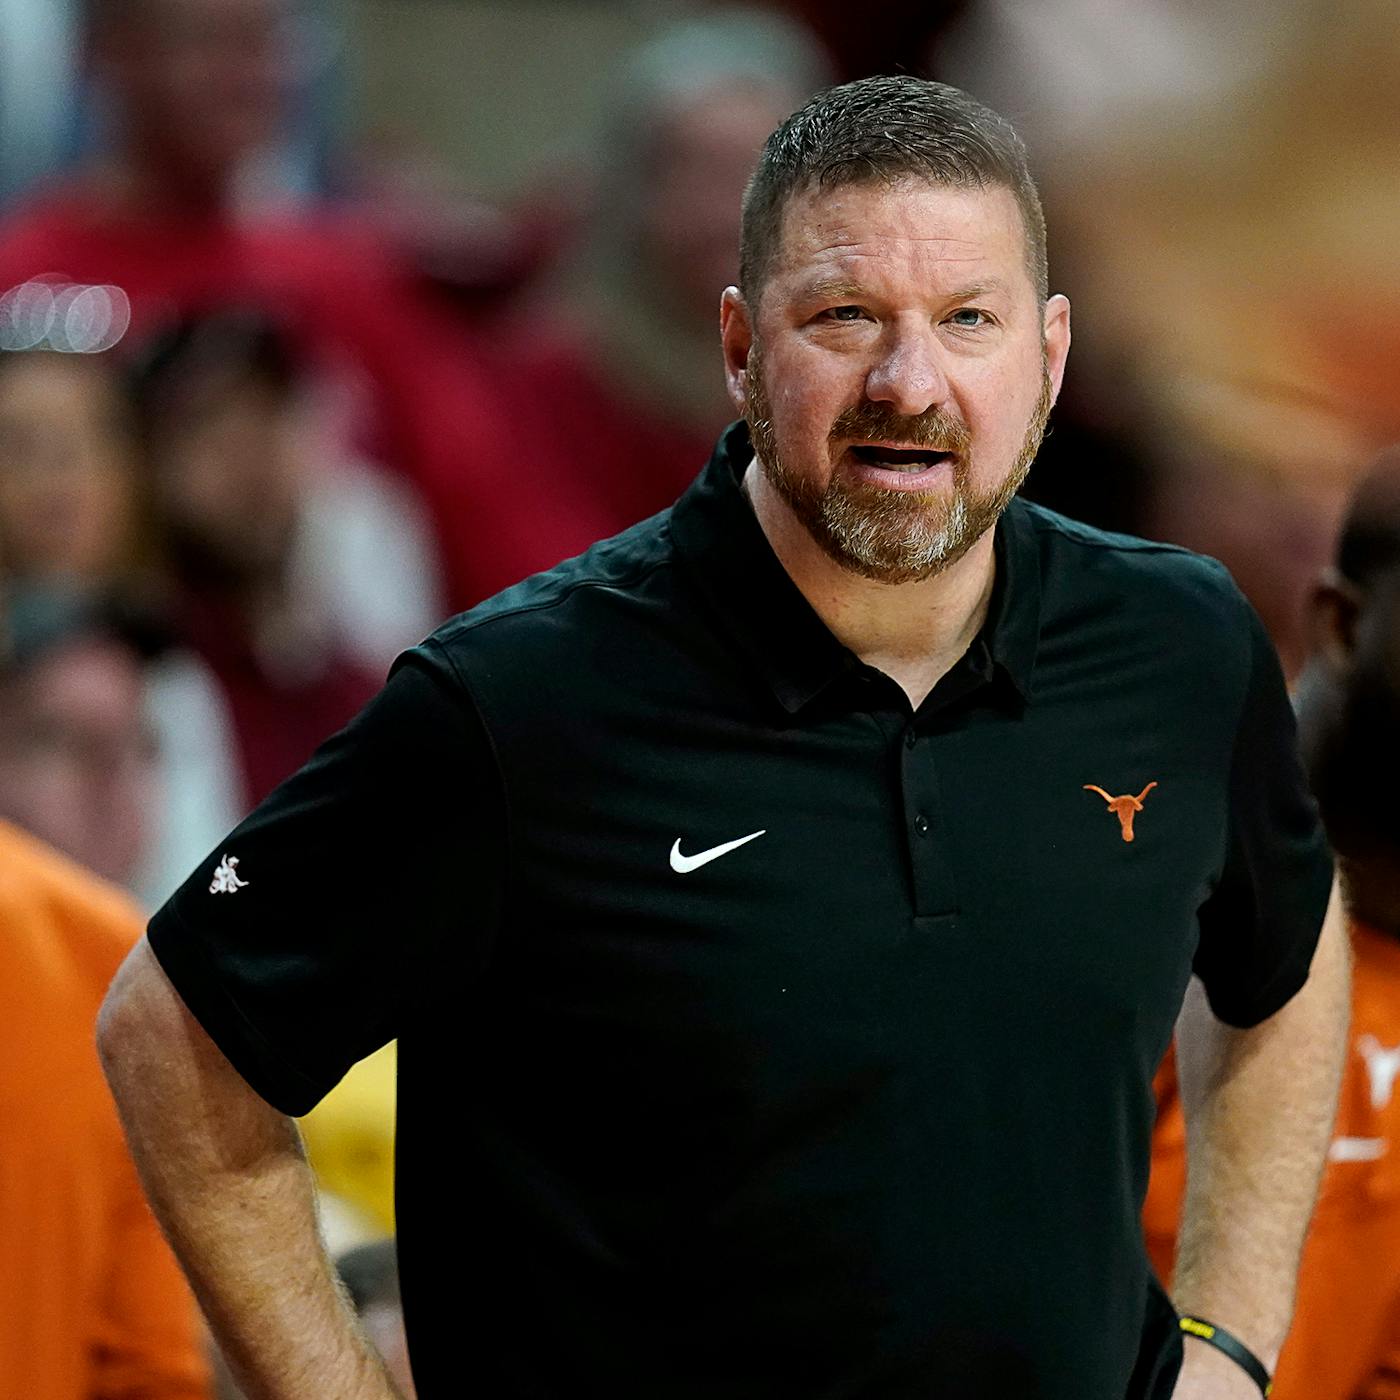 Chris Beard Did the One Thing Texas Tech Fans Cannot Forgive: Leave for UT